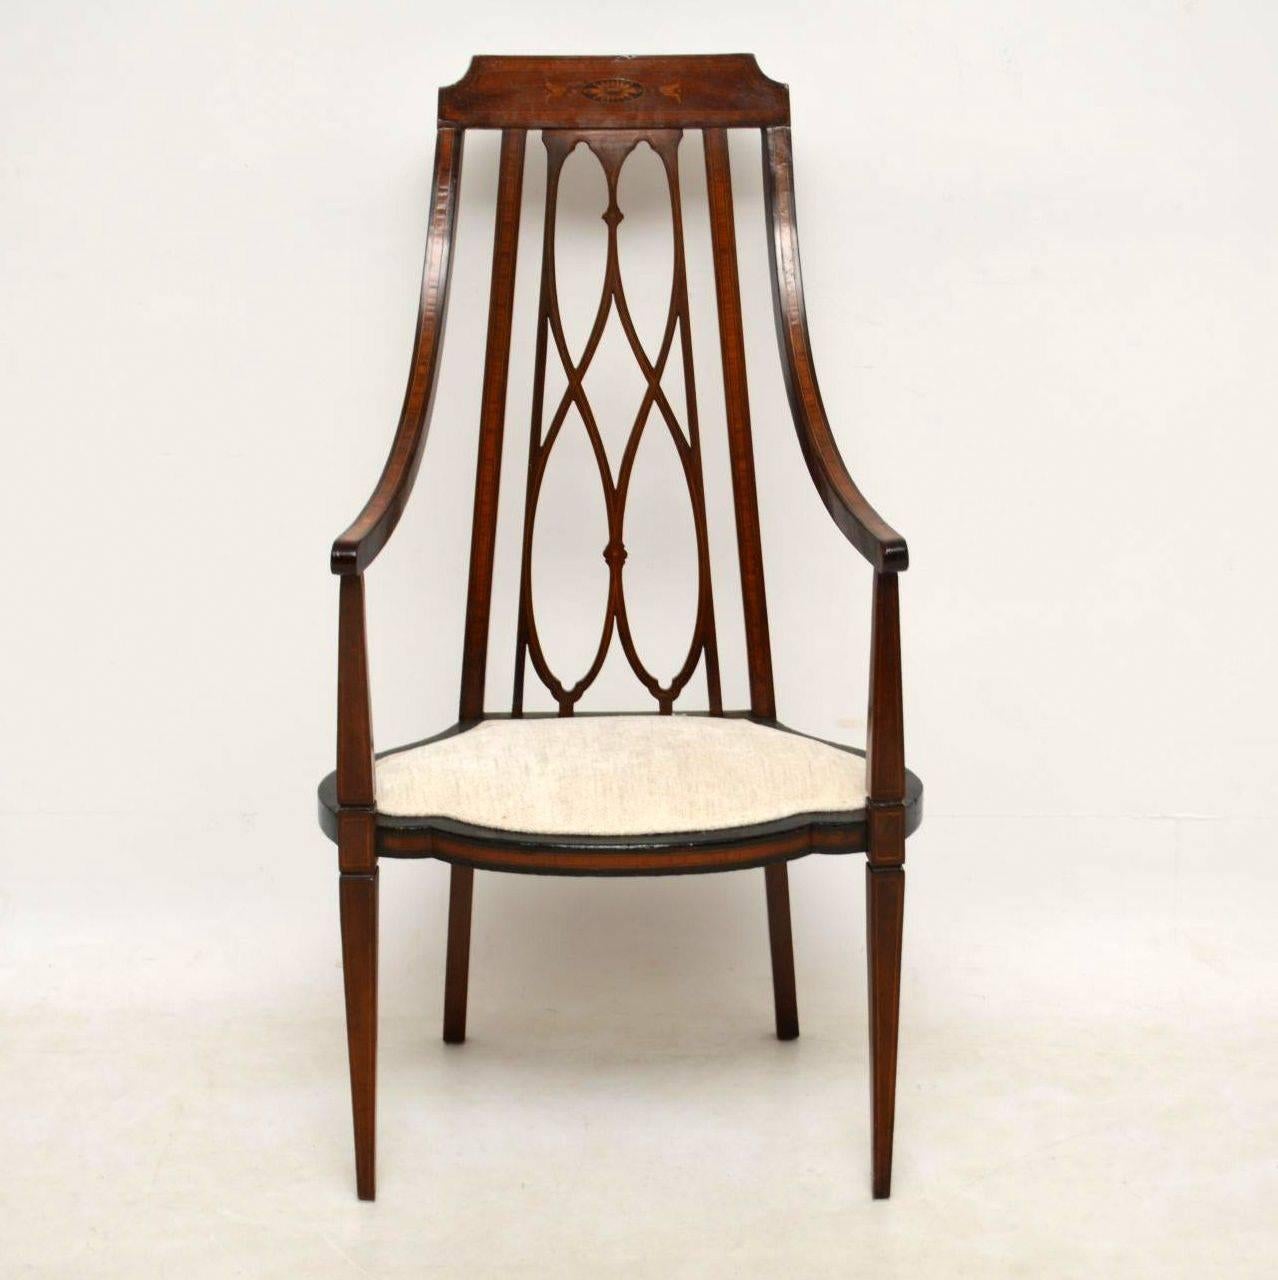 Very elegant, stylish antique Edwardian armchair with a newly upholstered seat. It's solid mahogany, with various intricate inlays of satin wood, tulip wood & ebony. This chair is in good condition & dates from the 1890-1910 period. It has a high